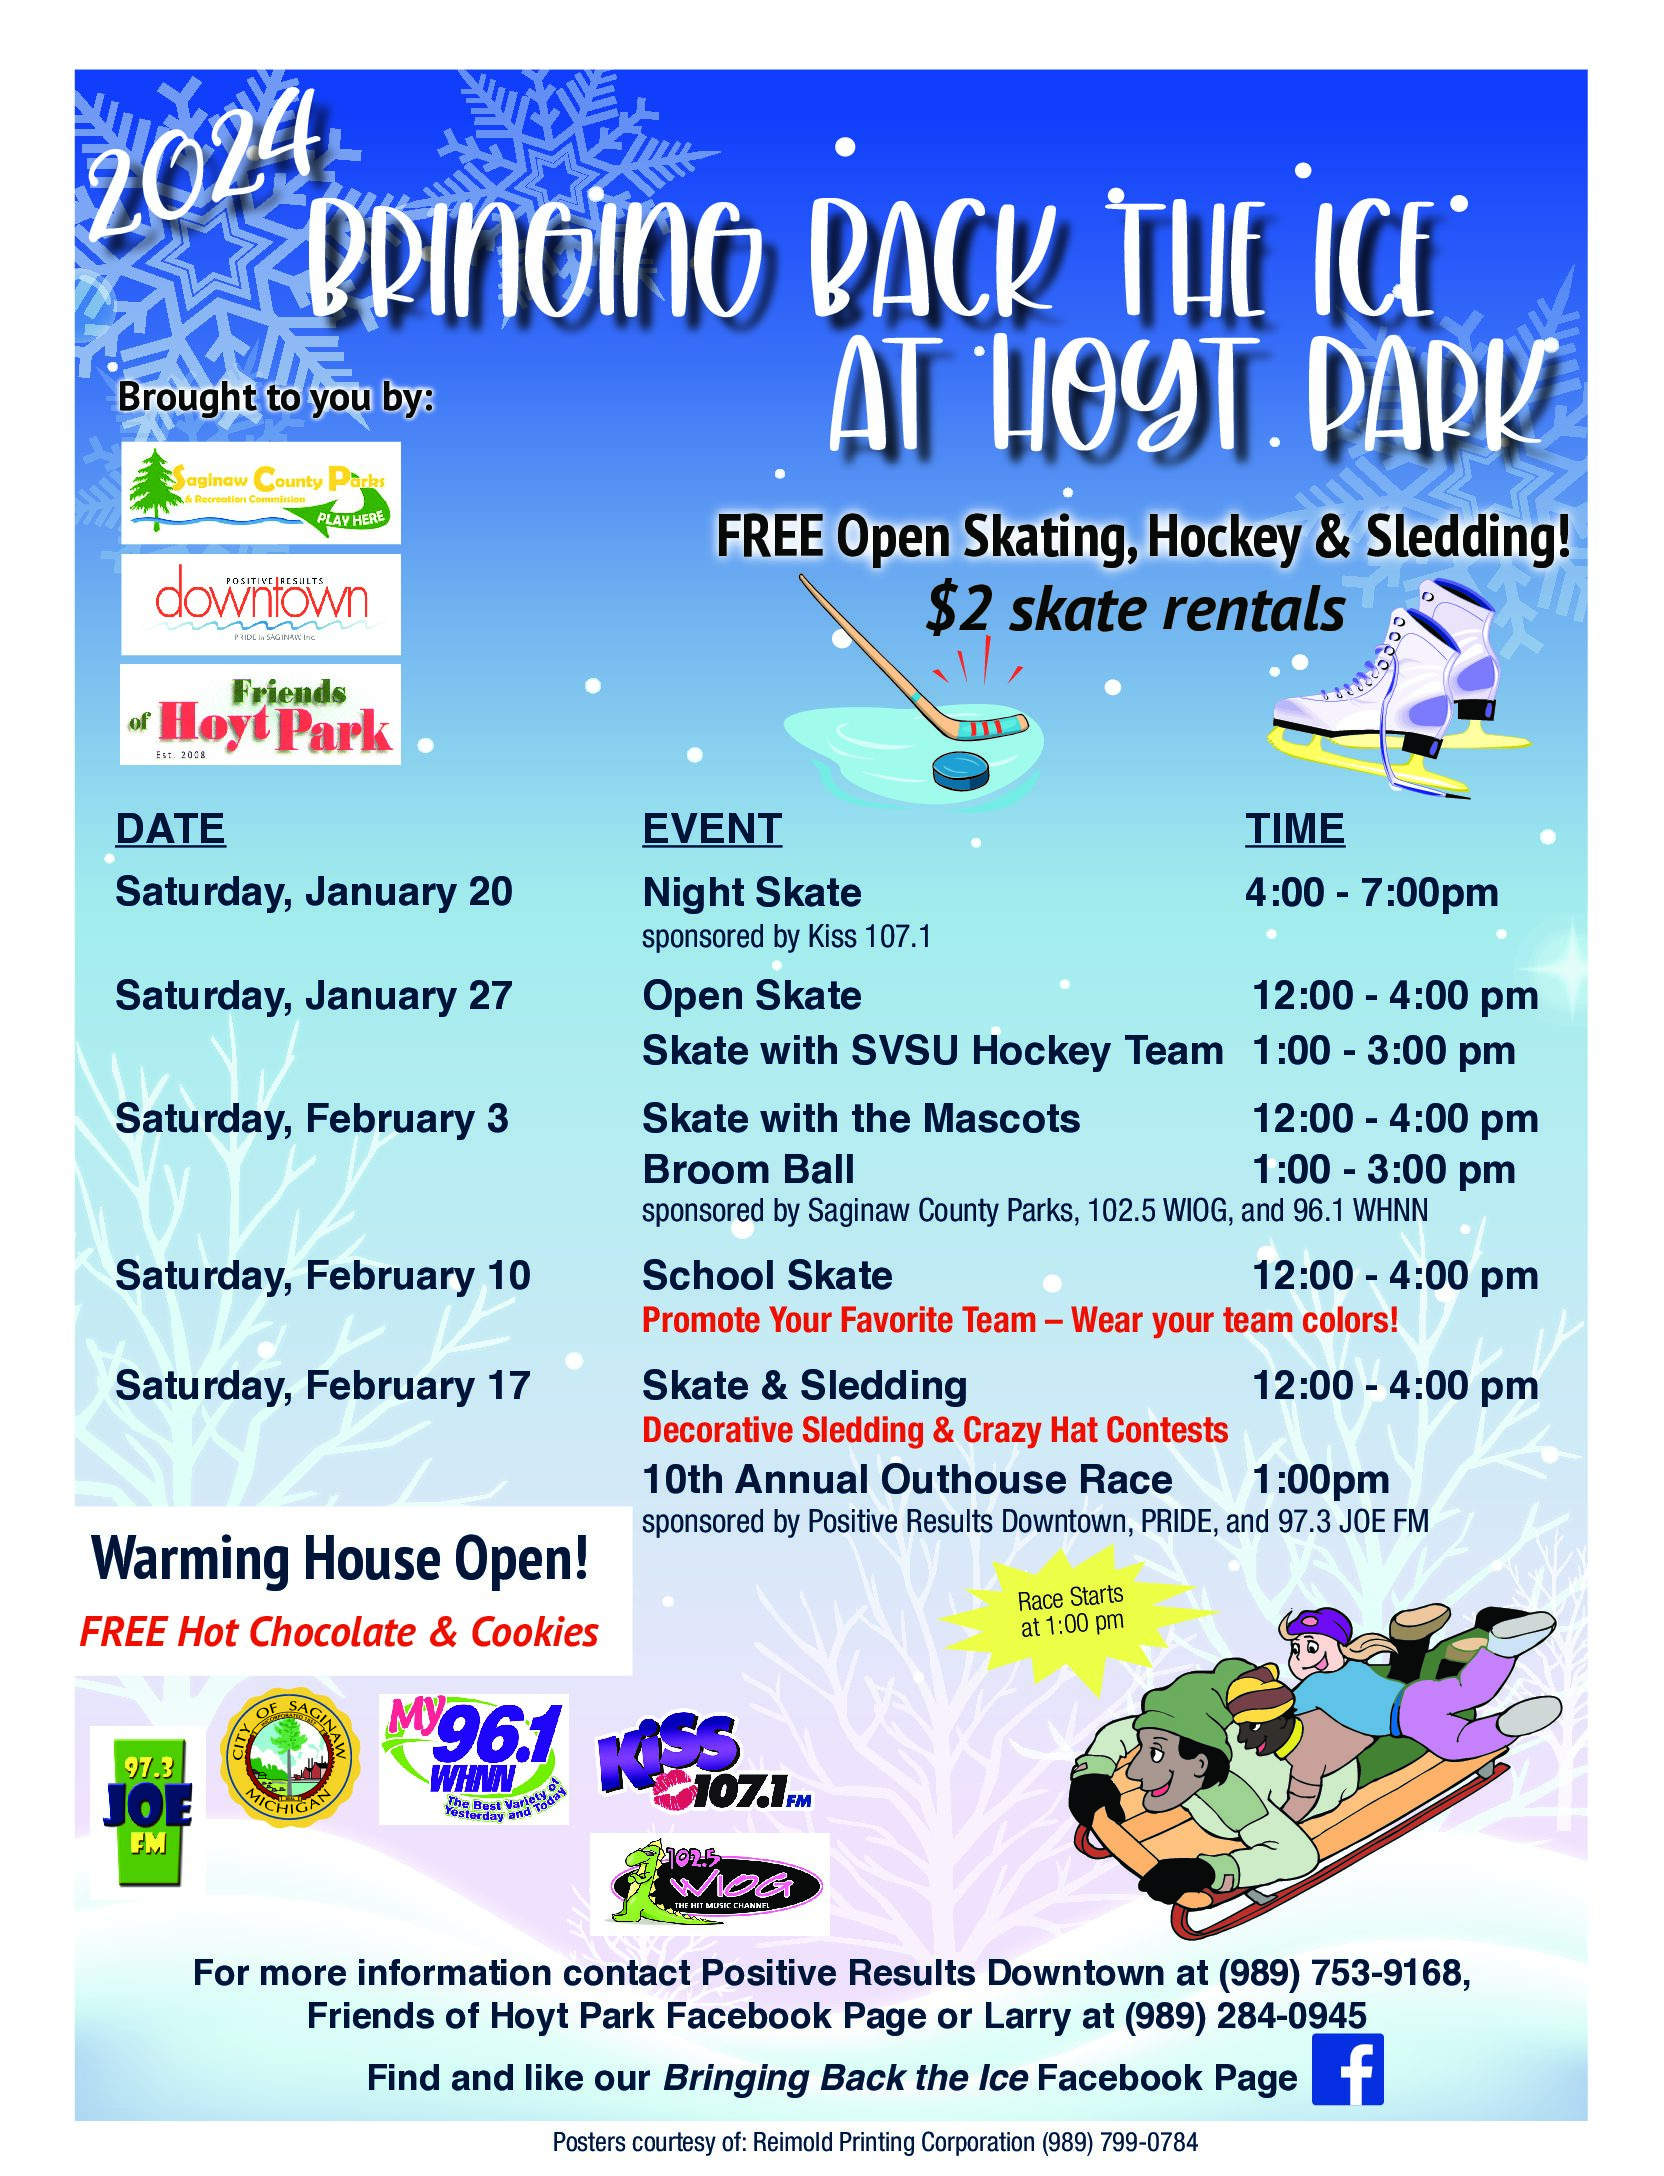 <h1 class="tribe-events-single-event-title">Bringing Back The Ice at Hoyt Park</h1>